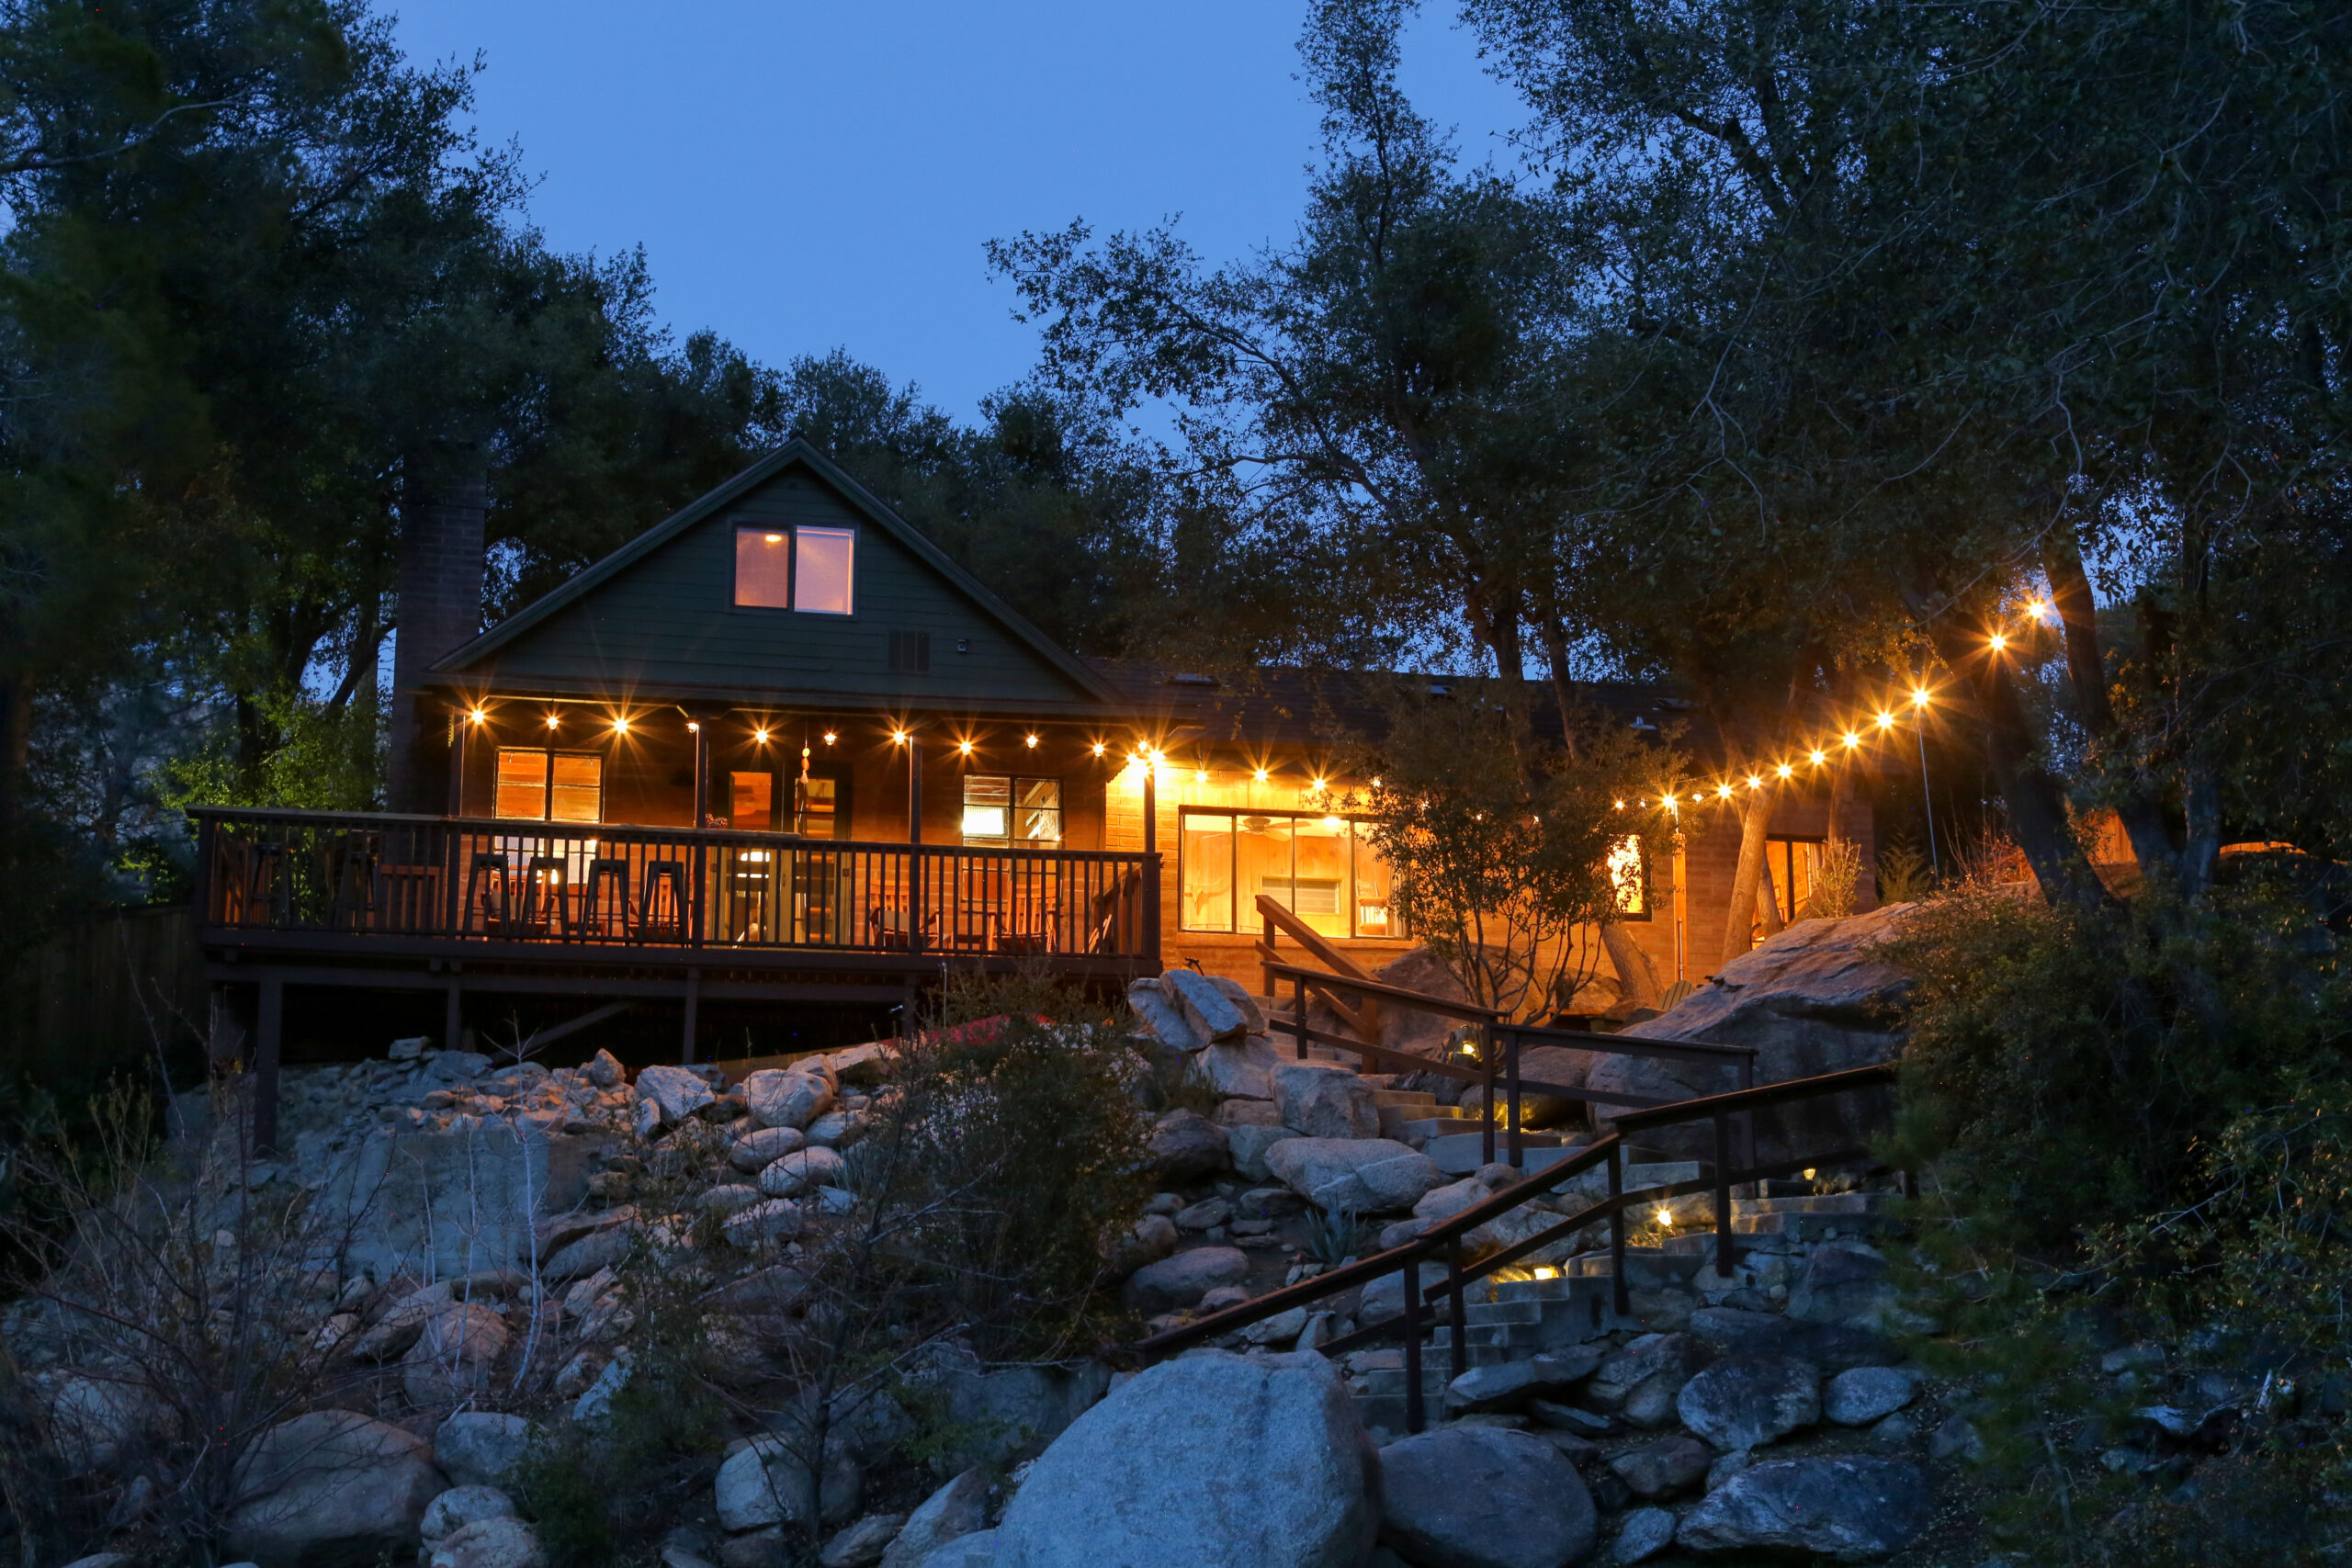 Night view of patio lights at the Kern River House's River Willow Cabin in Kernville, Califonia.